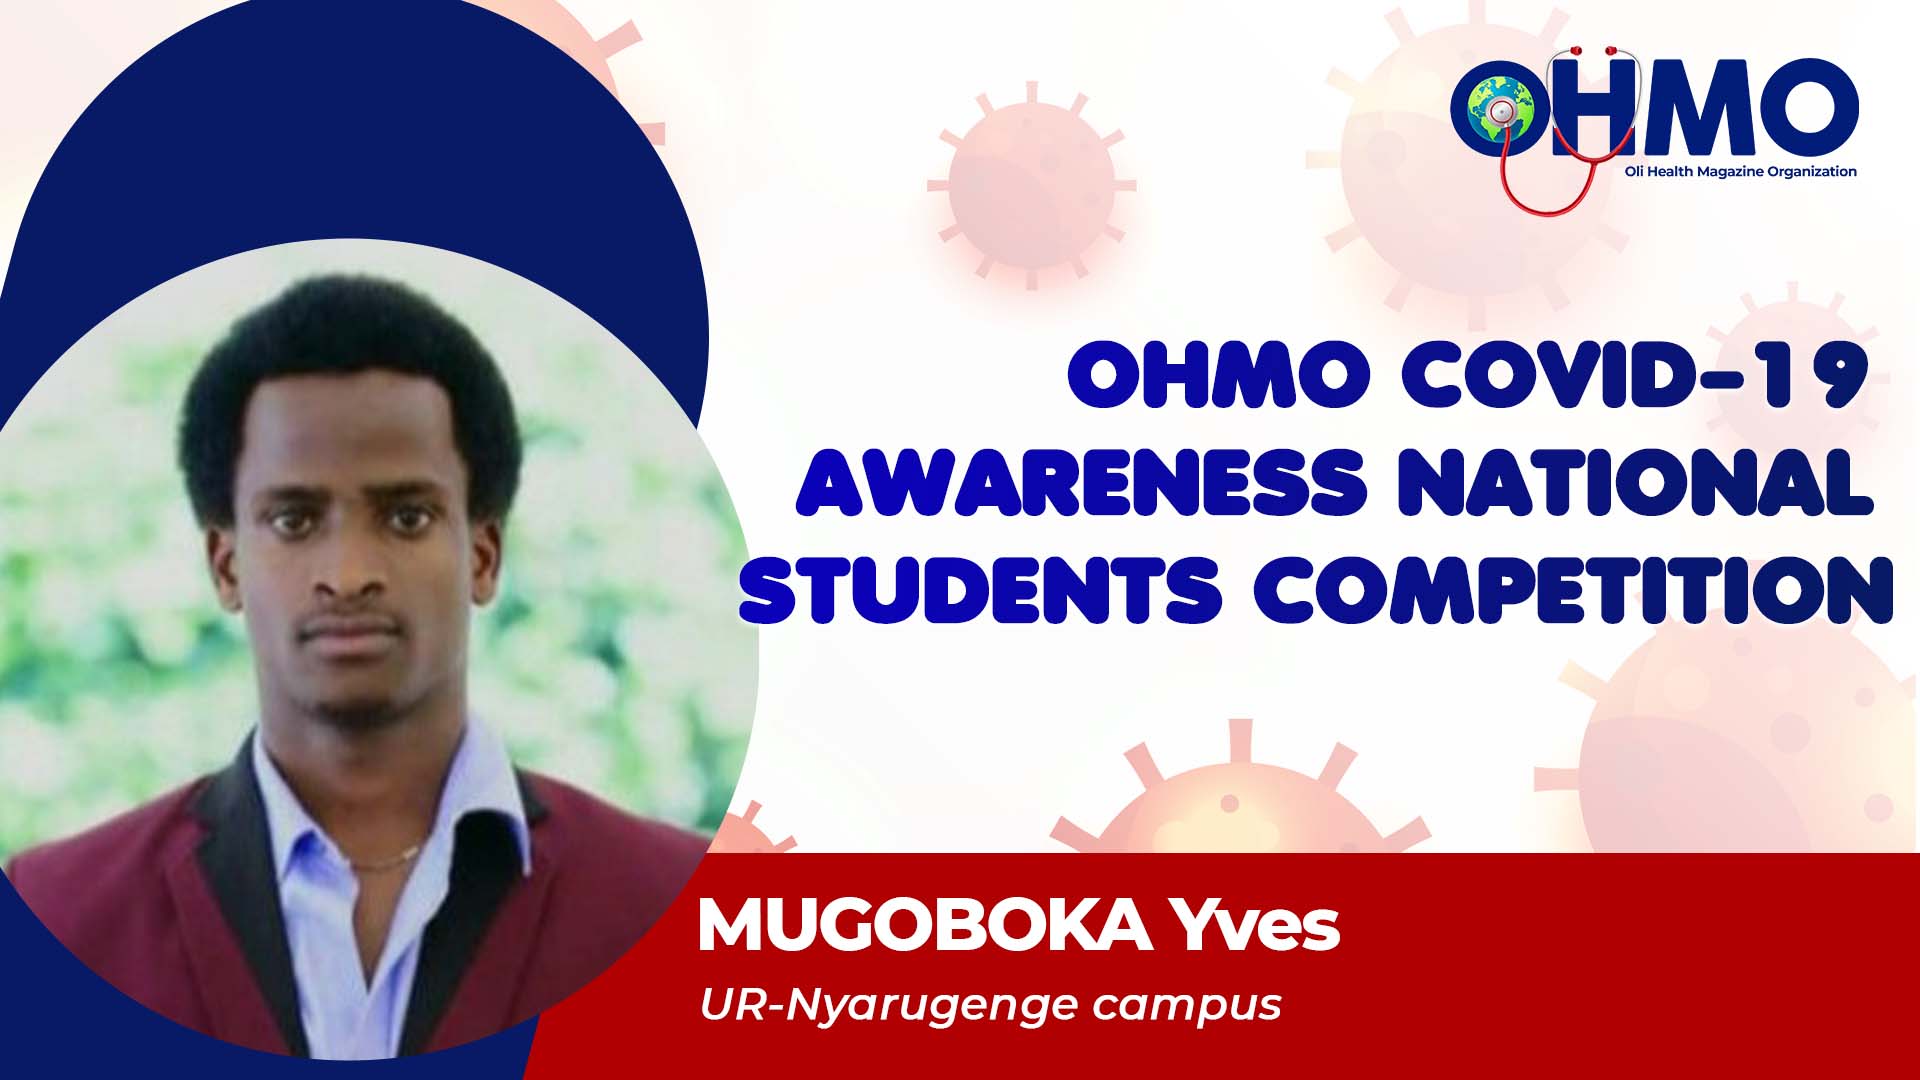 Mitigation to Take a Stand Against COVID-19 - MUGOBOKA Yves from UR (ENTRY 55)